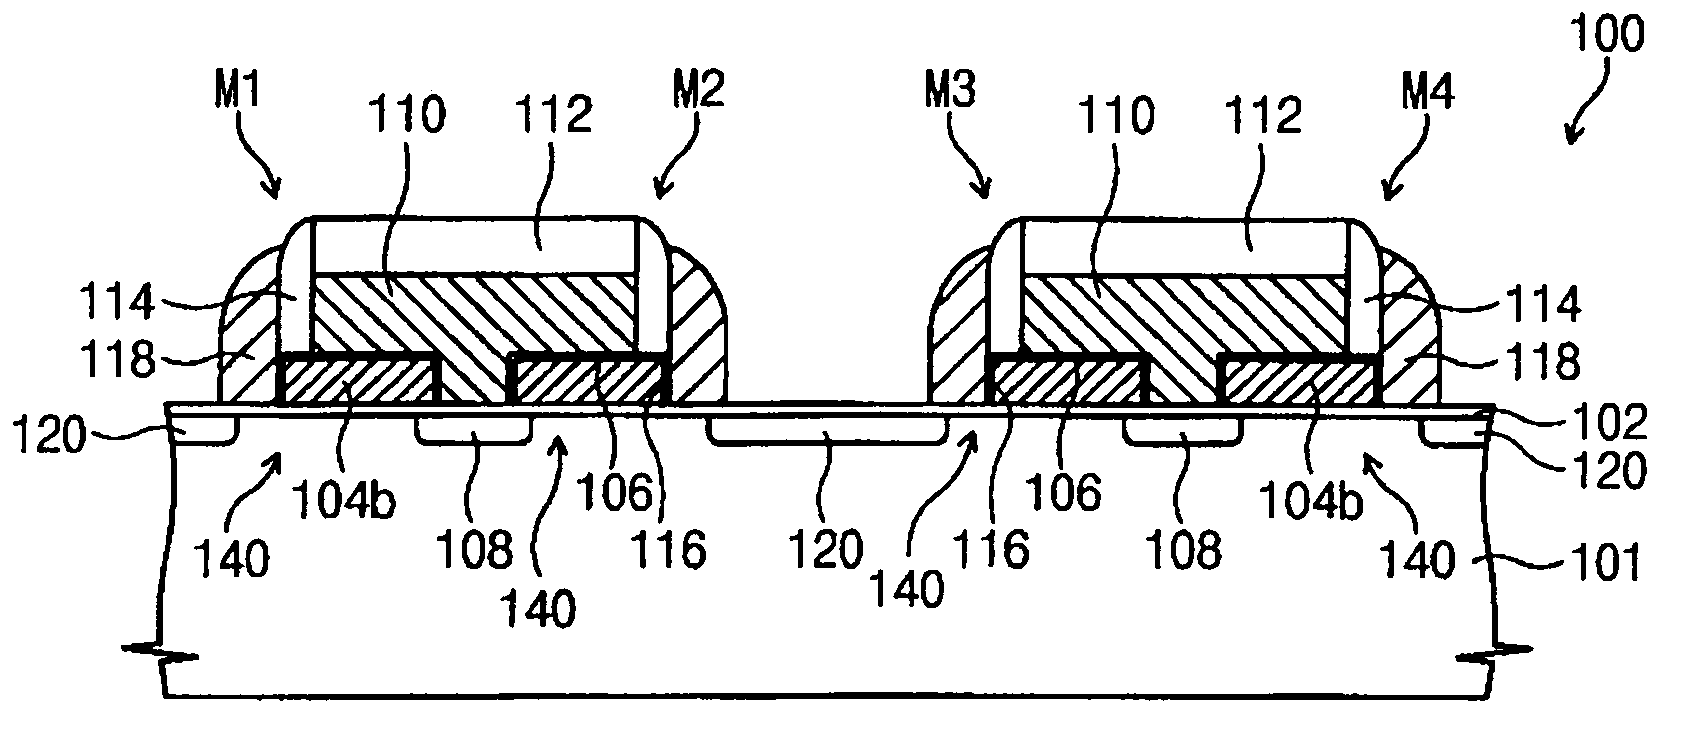 Split gate non-volatile memory devices and methods of forming same